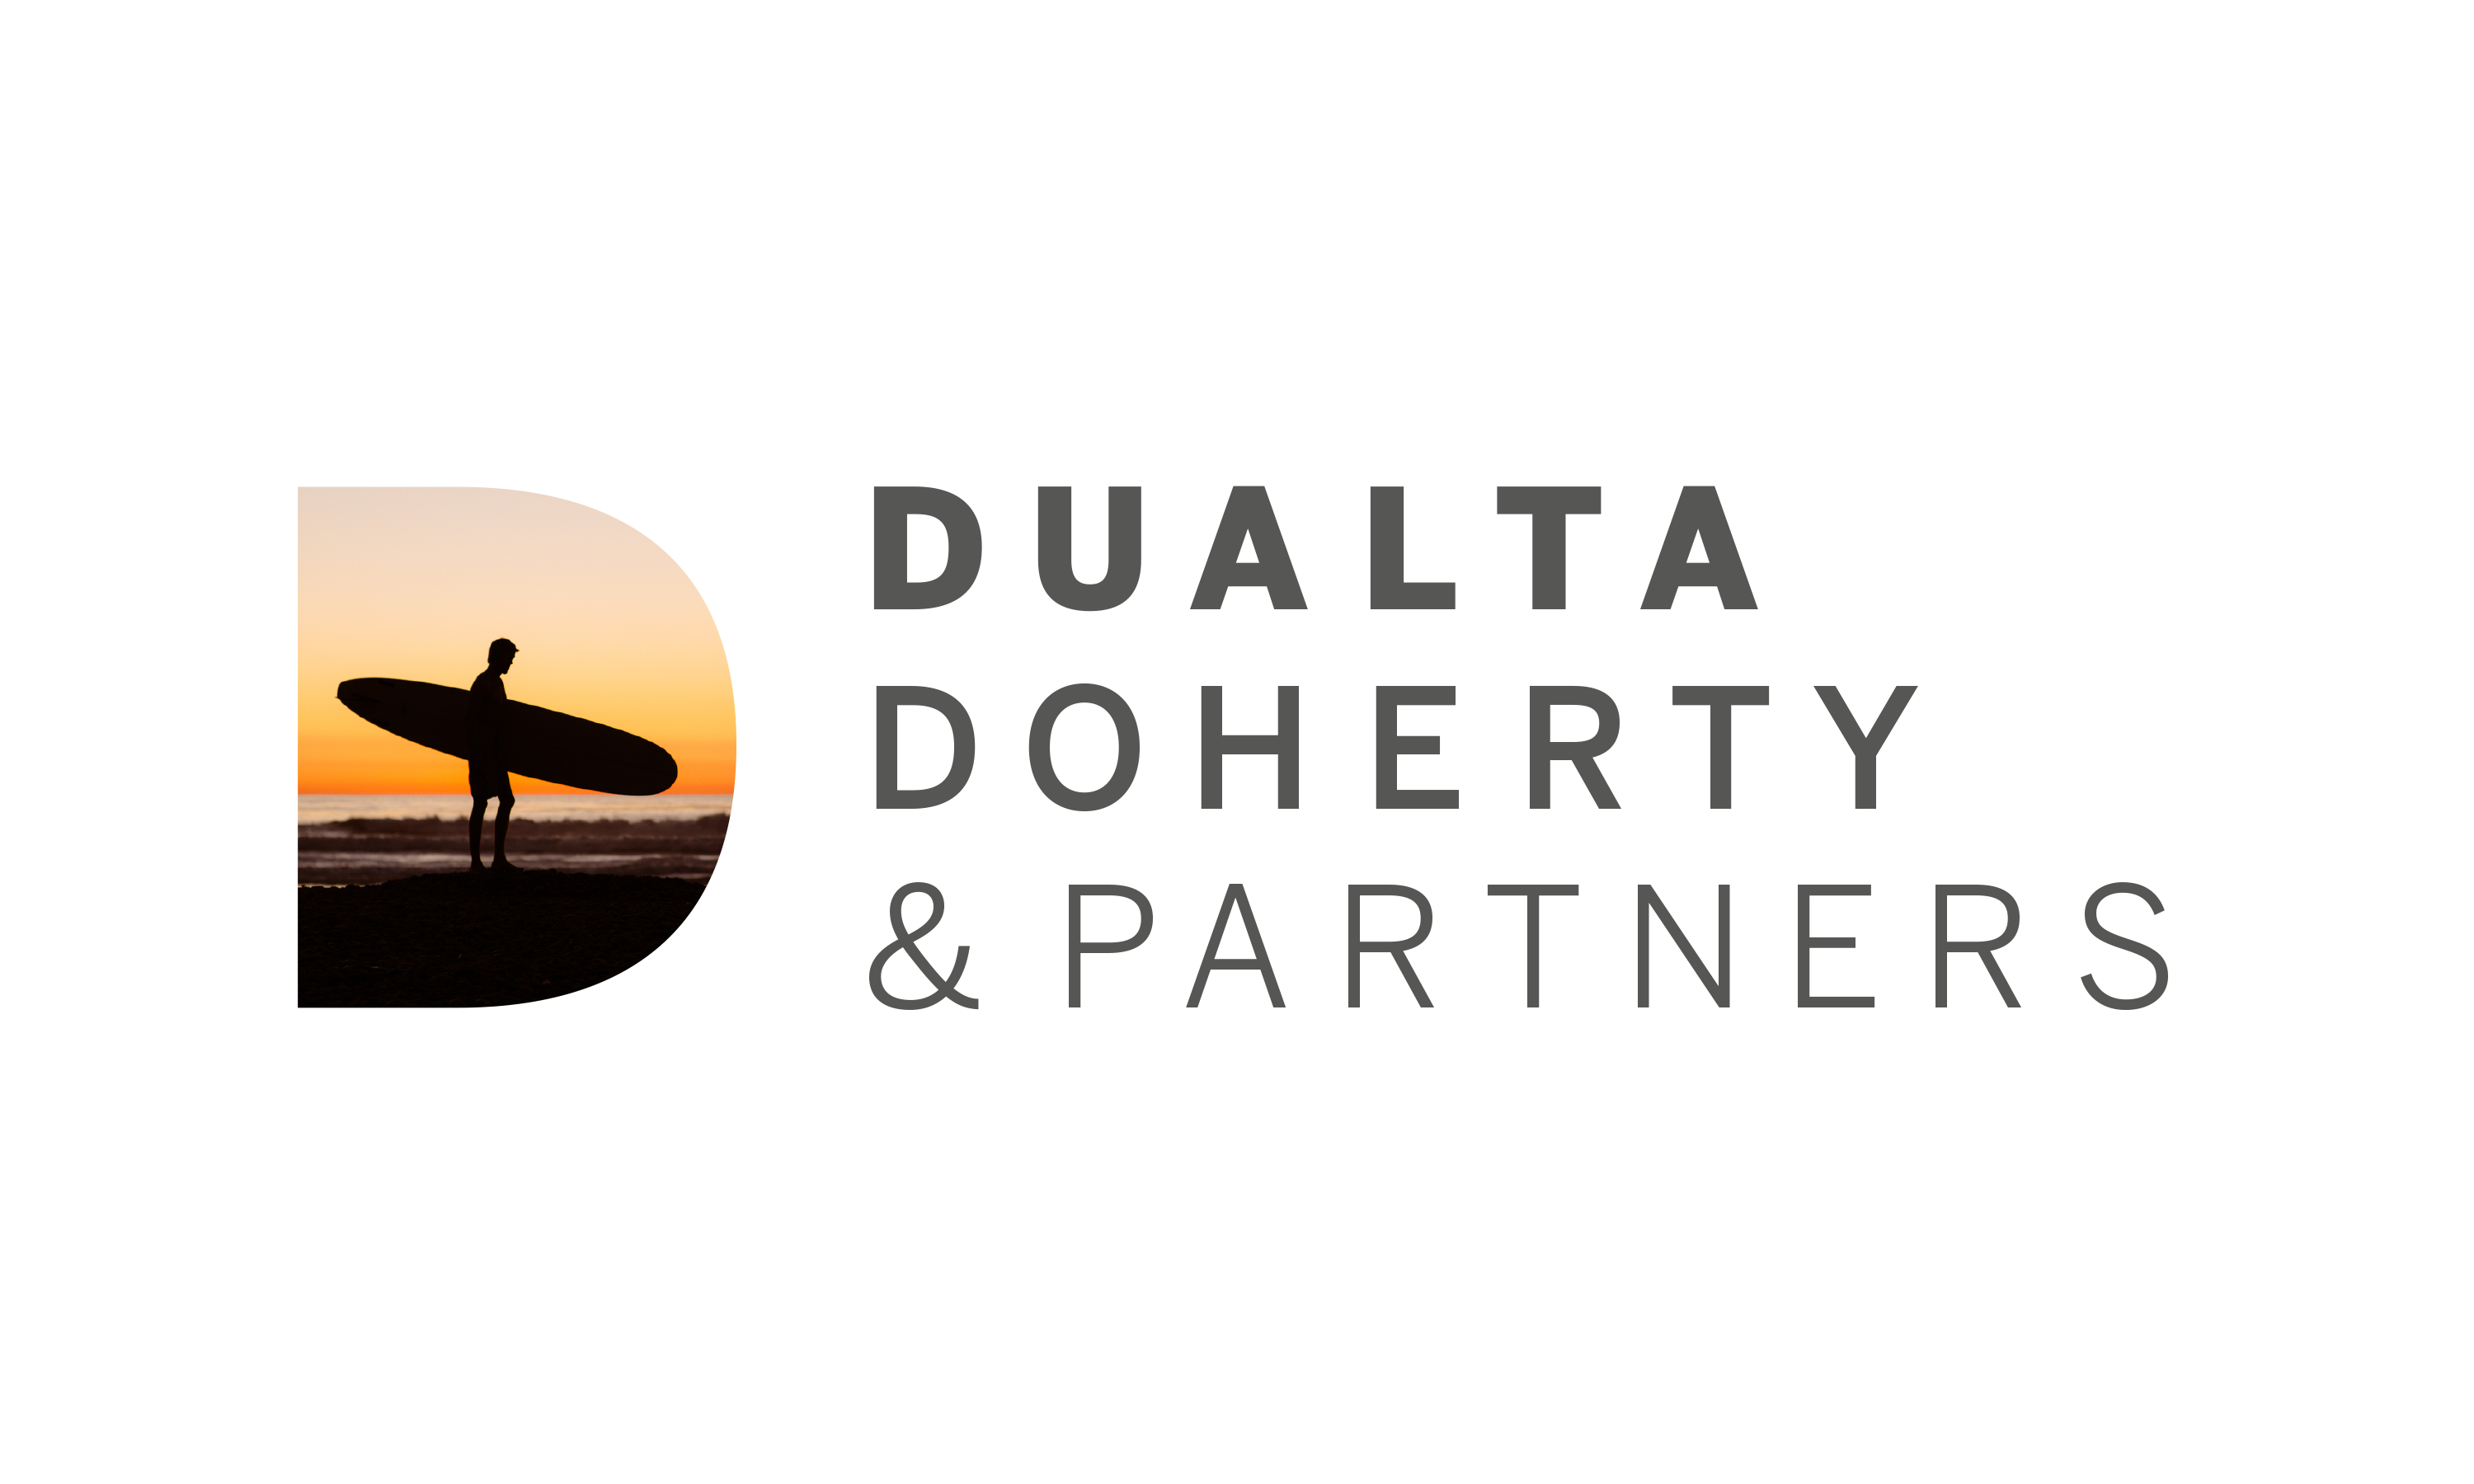 Branding by Neon - Dualta Doherty and Partners logo designed by Dana Robertson